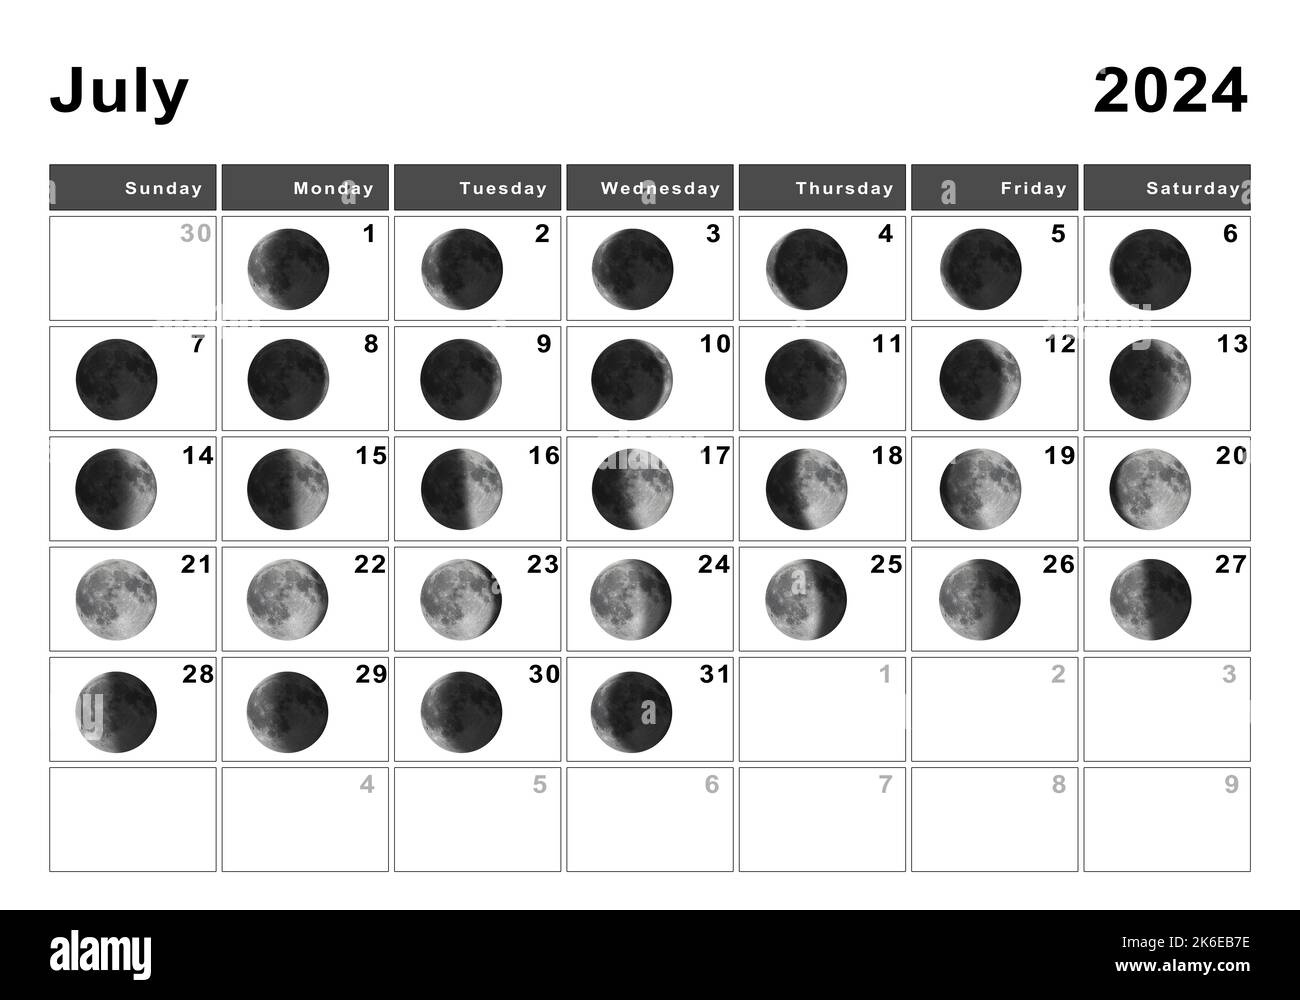 July 2024 Lunar Calendar, Moon Cycles, Moon Phases Stock Photo - Alamy in Calendar Moon July 2024